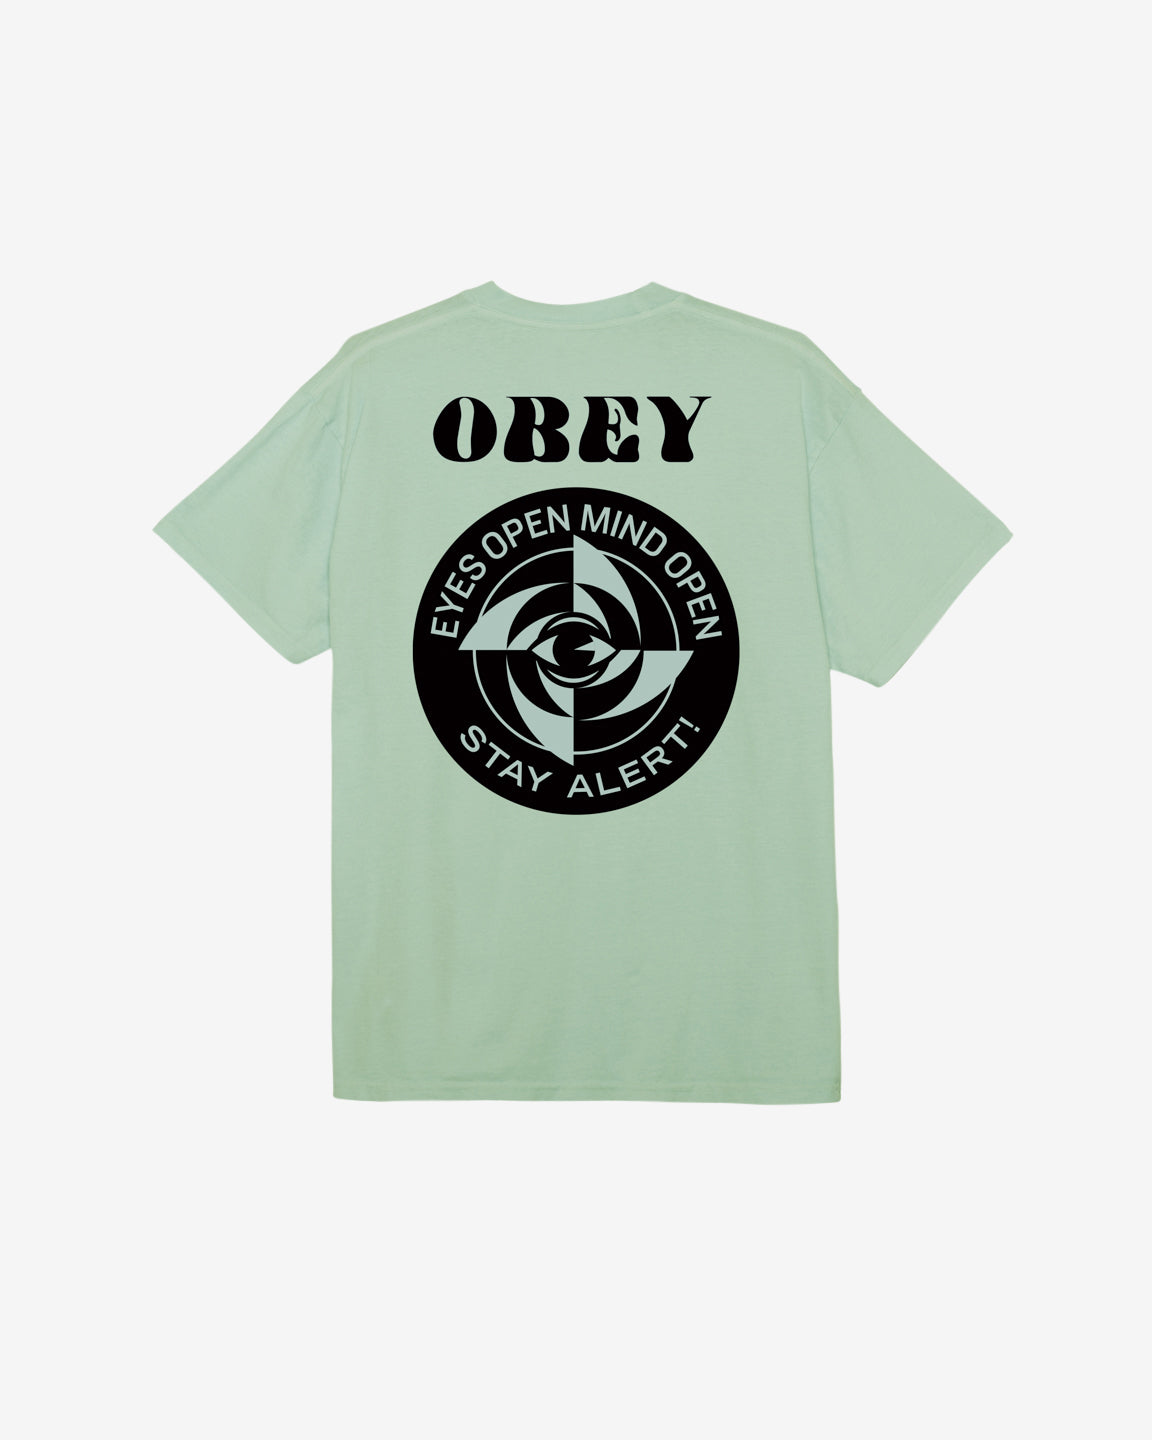 OBEY STAY ALERT PIGMENT TEE